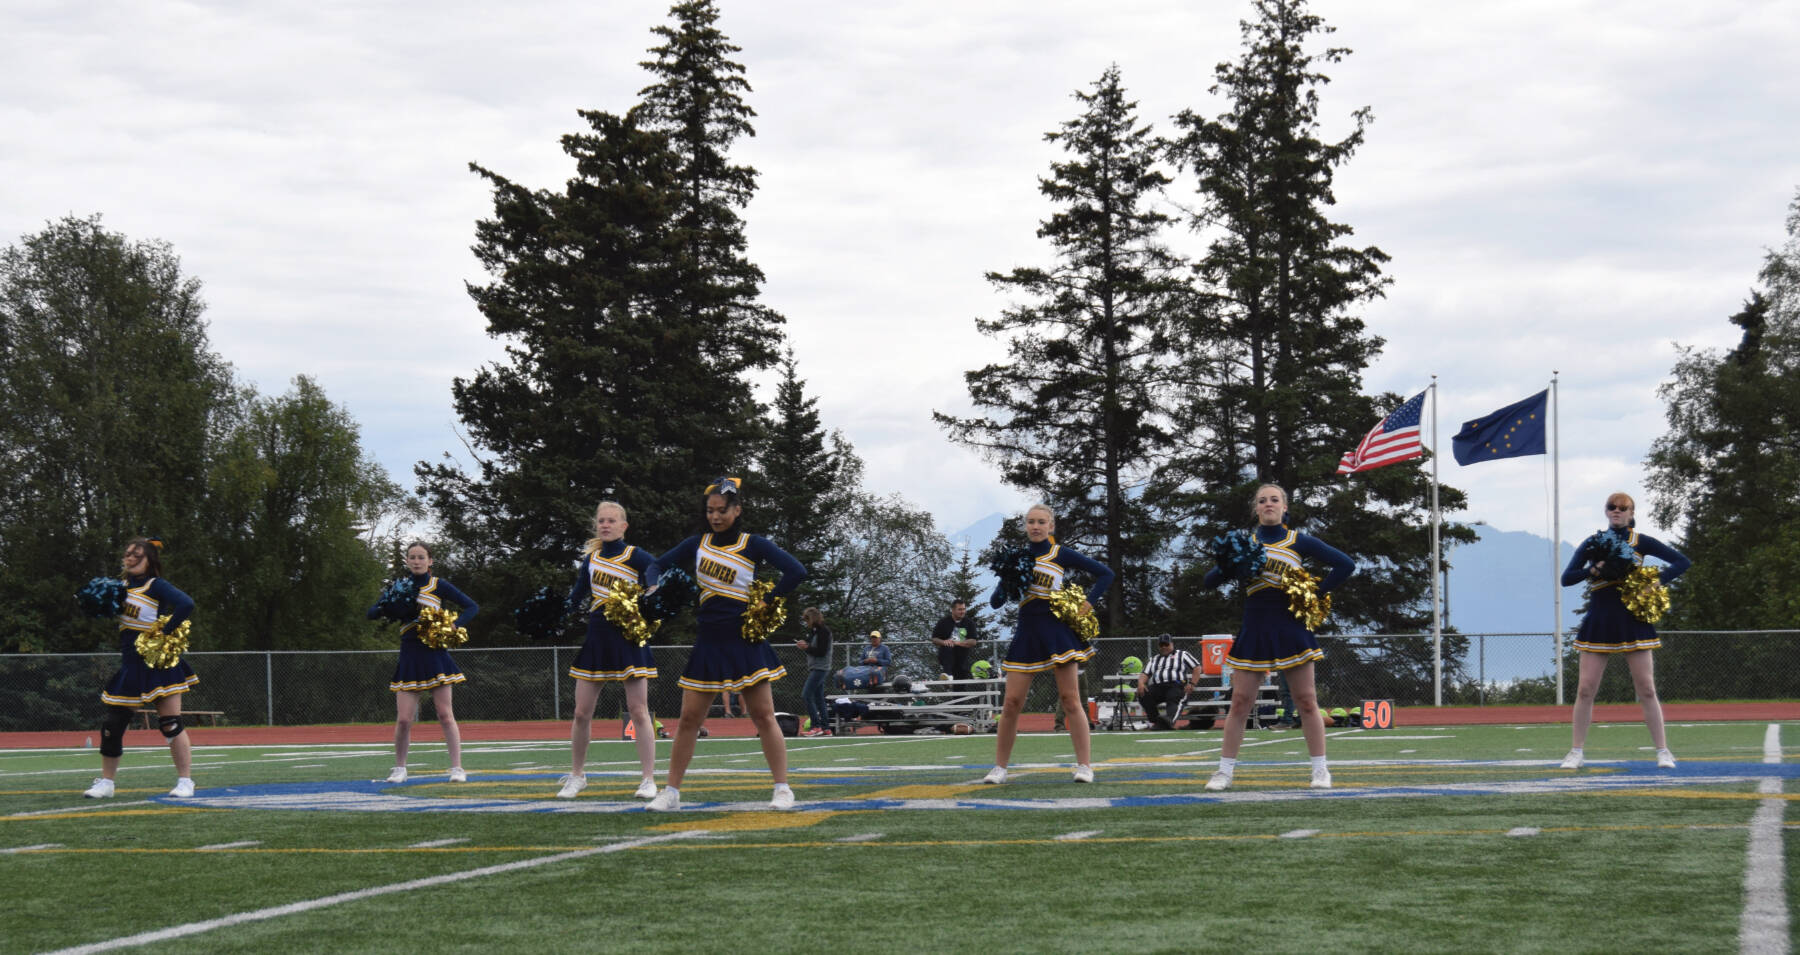 The Homer Mariner cheer team performs their halftime show at the home game against Redington on Saturday, Aug. 19, 2023 in Homer, Alaska (Emilie Springer/Homer News)